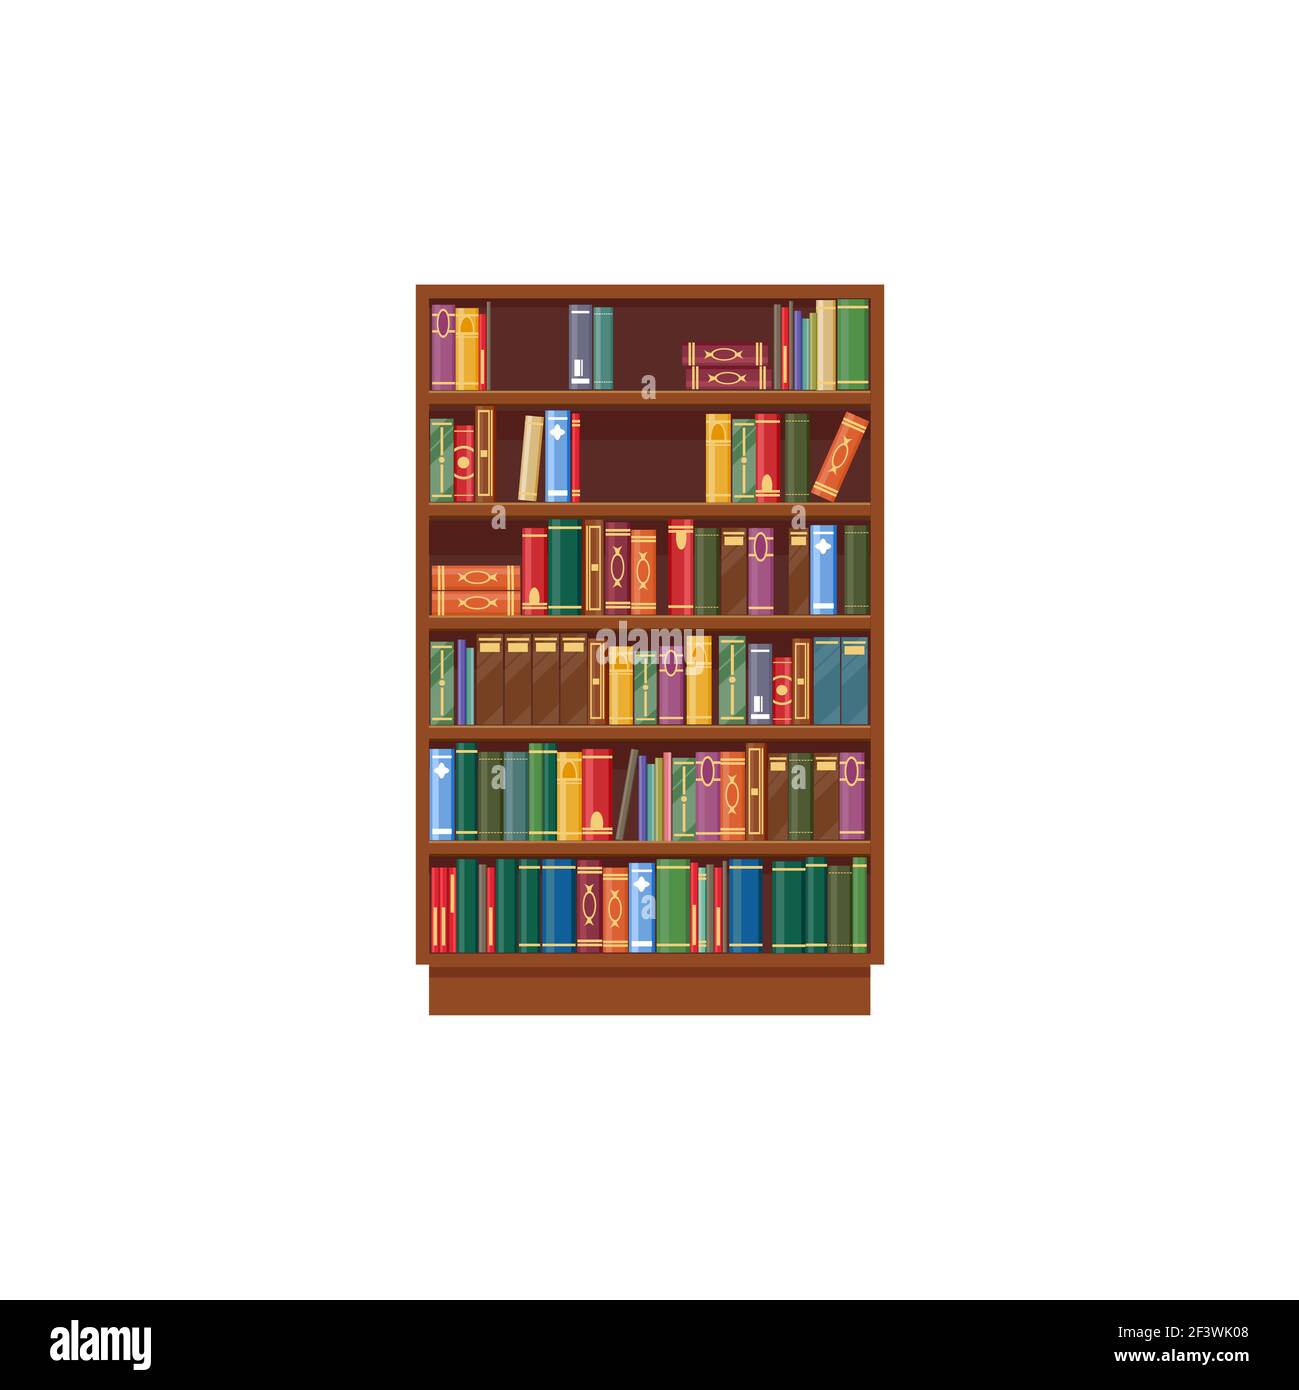 Bookcase vector icon, cartoon shelf with books in library, wooden bookstore with colorful spines on shelves isolated on white background. Literature a Stock Vector